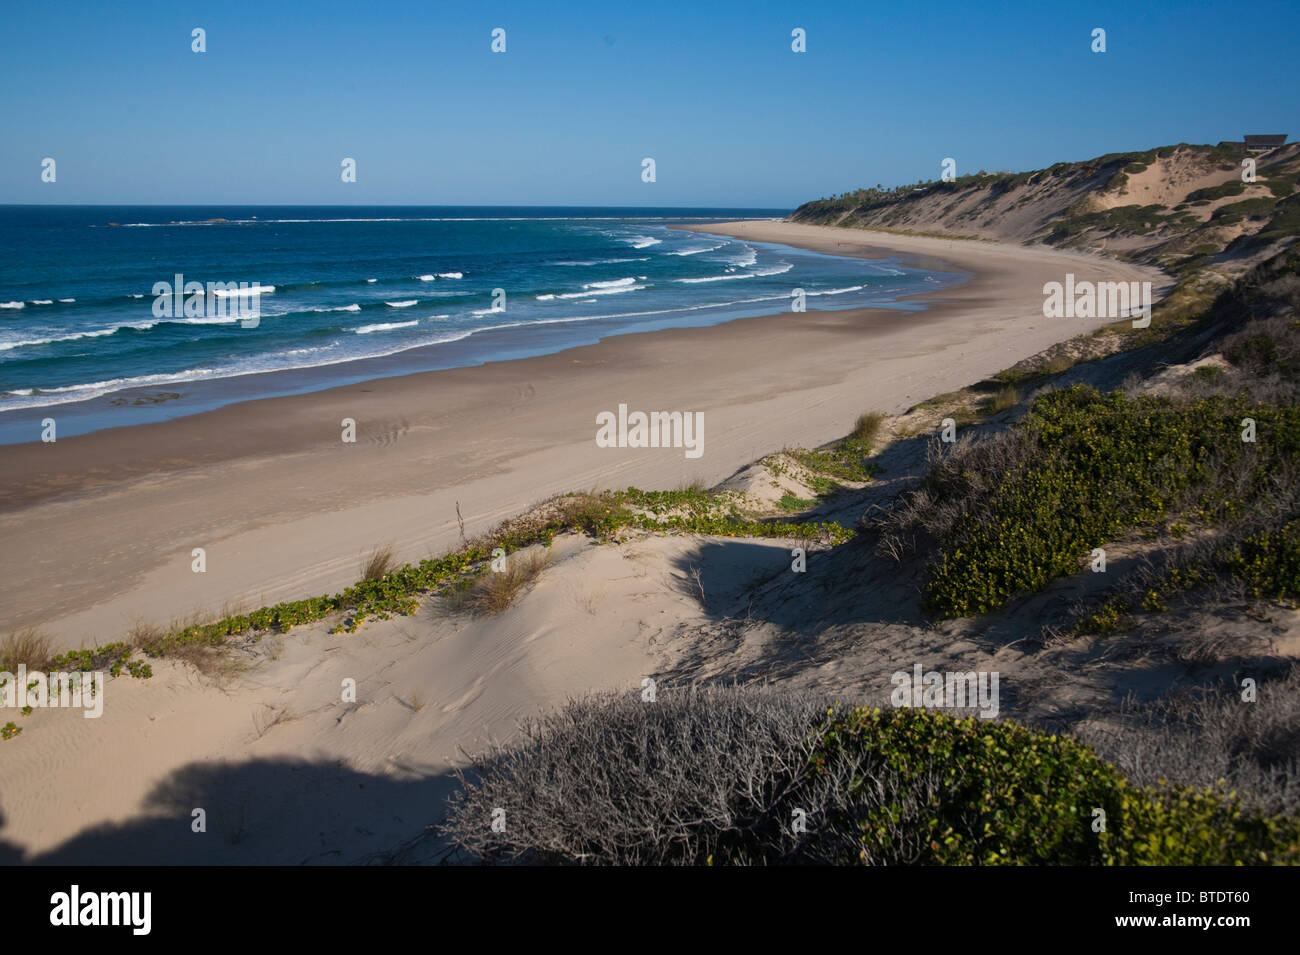 Scenic view of an uninhabited beach on a remote portion of the coastline Stock Photo